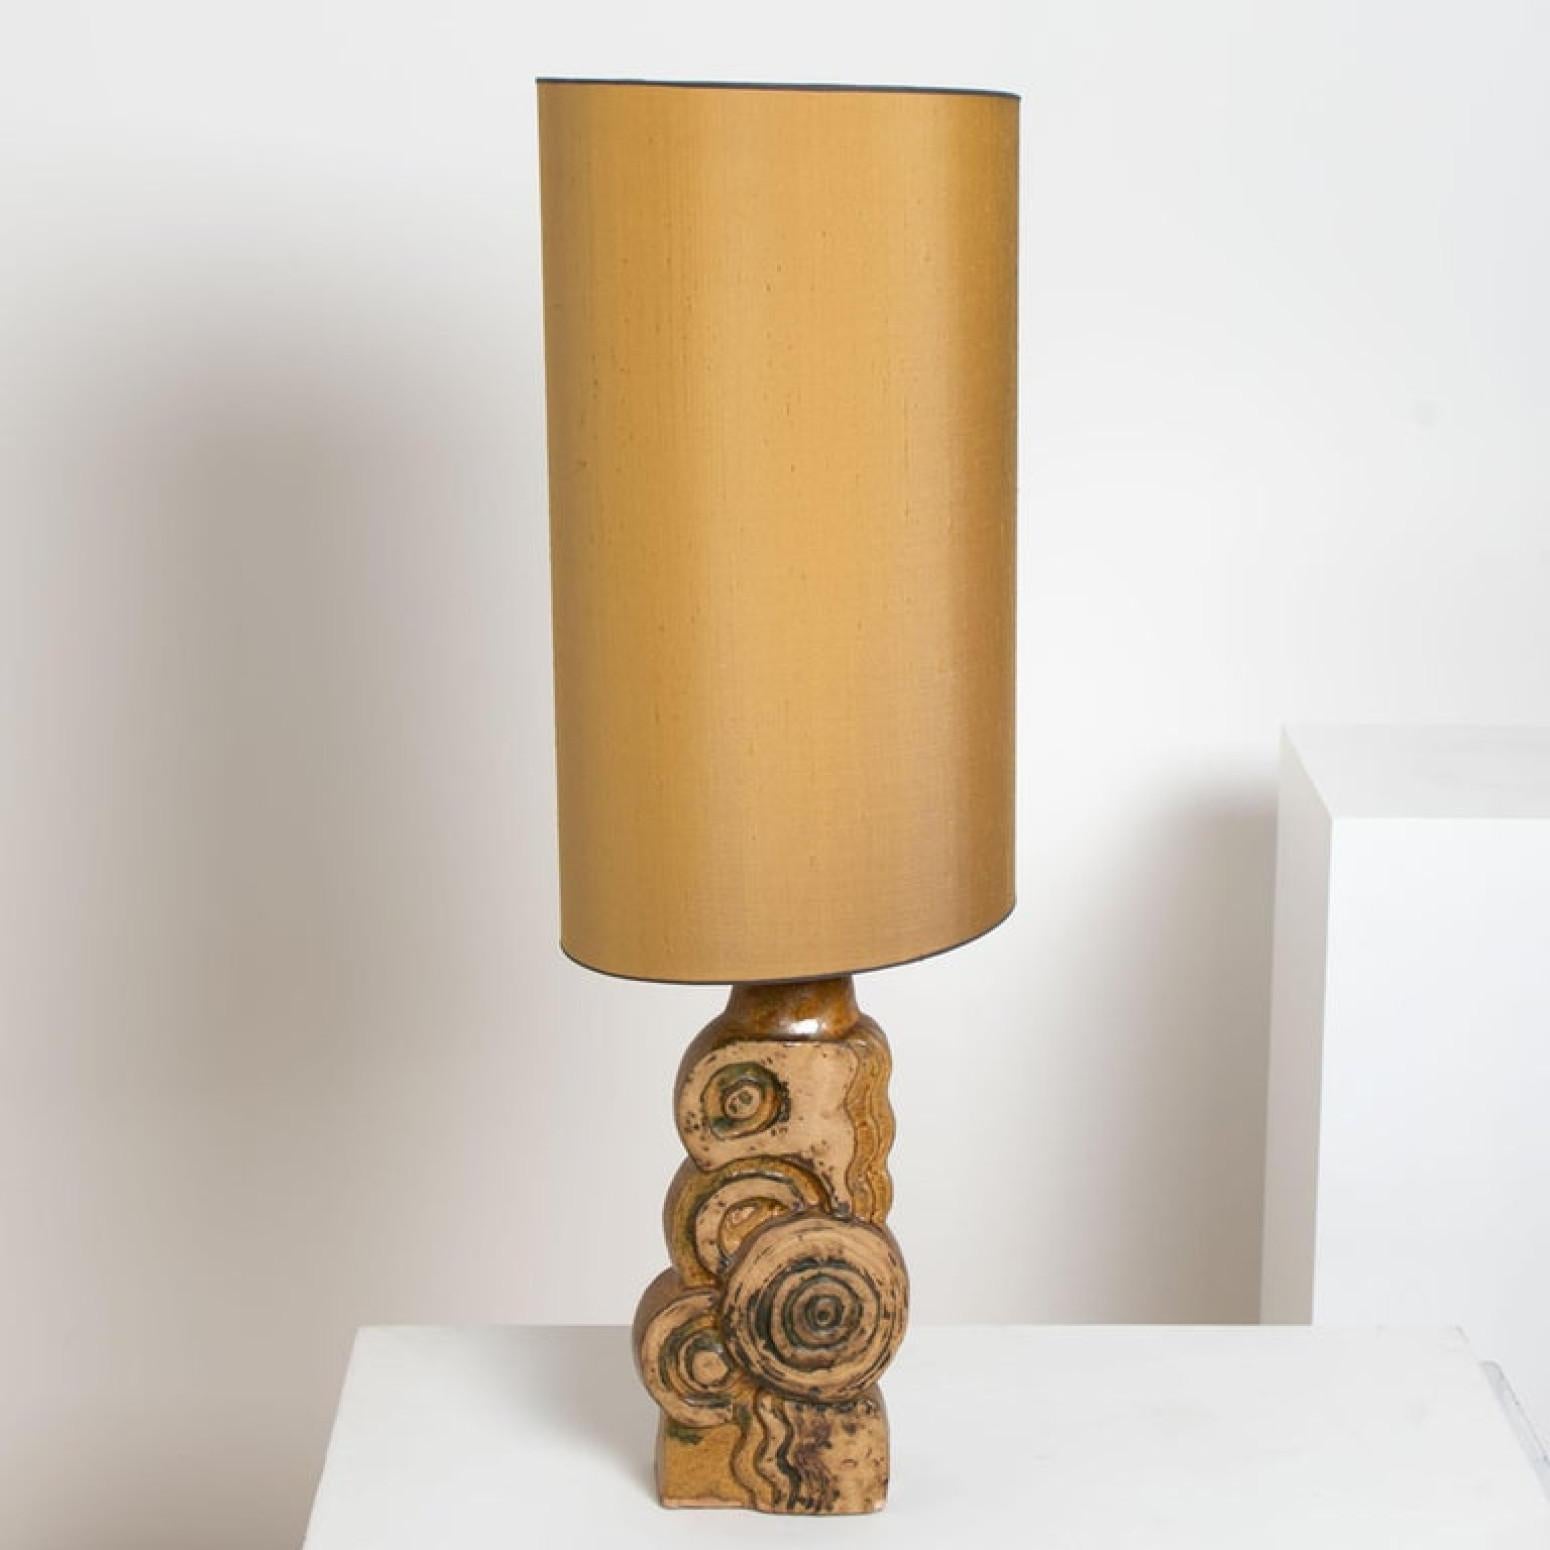 B. Rooke Ceramic Lamp with New Custom Made Lampshade by René Houben, 1960s For Sale 5